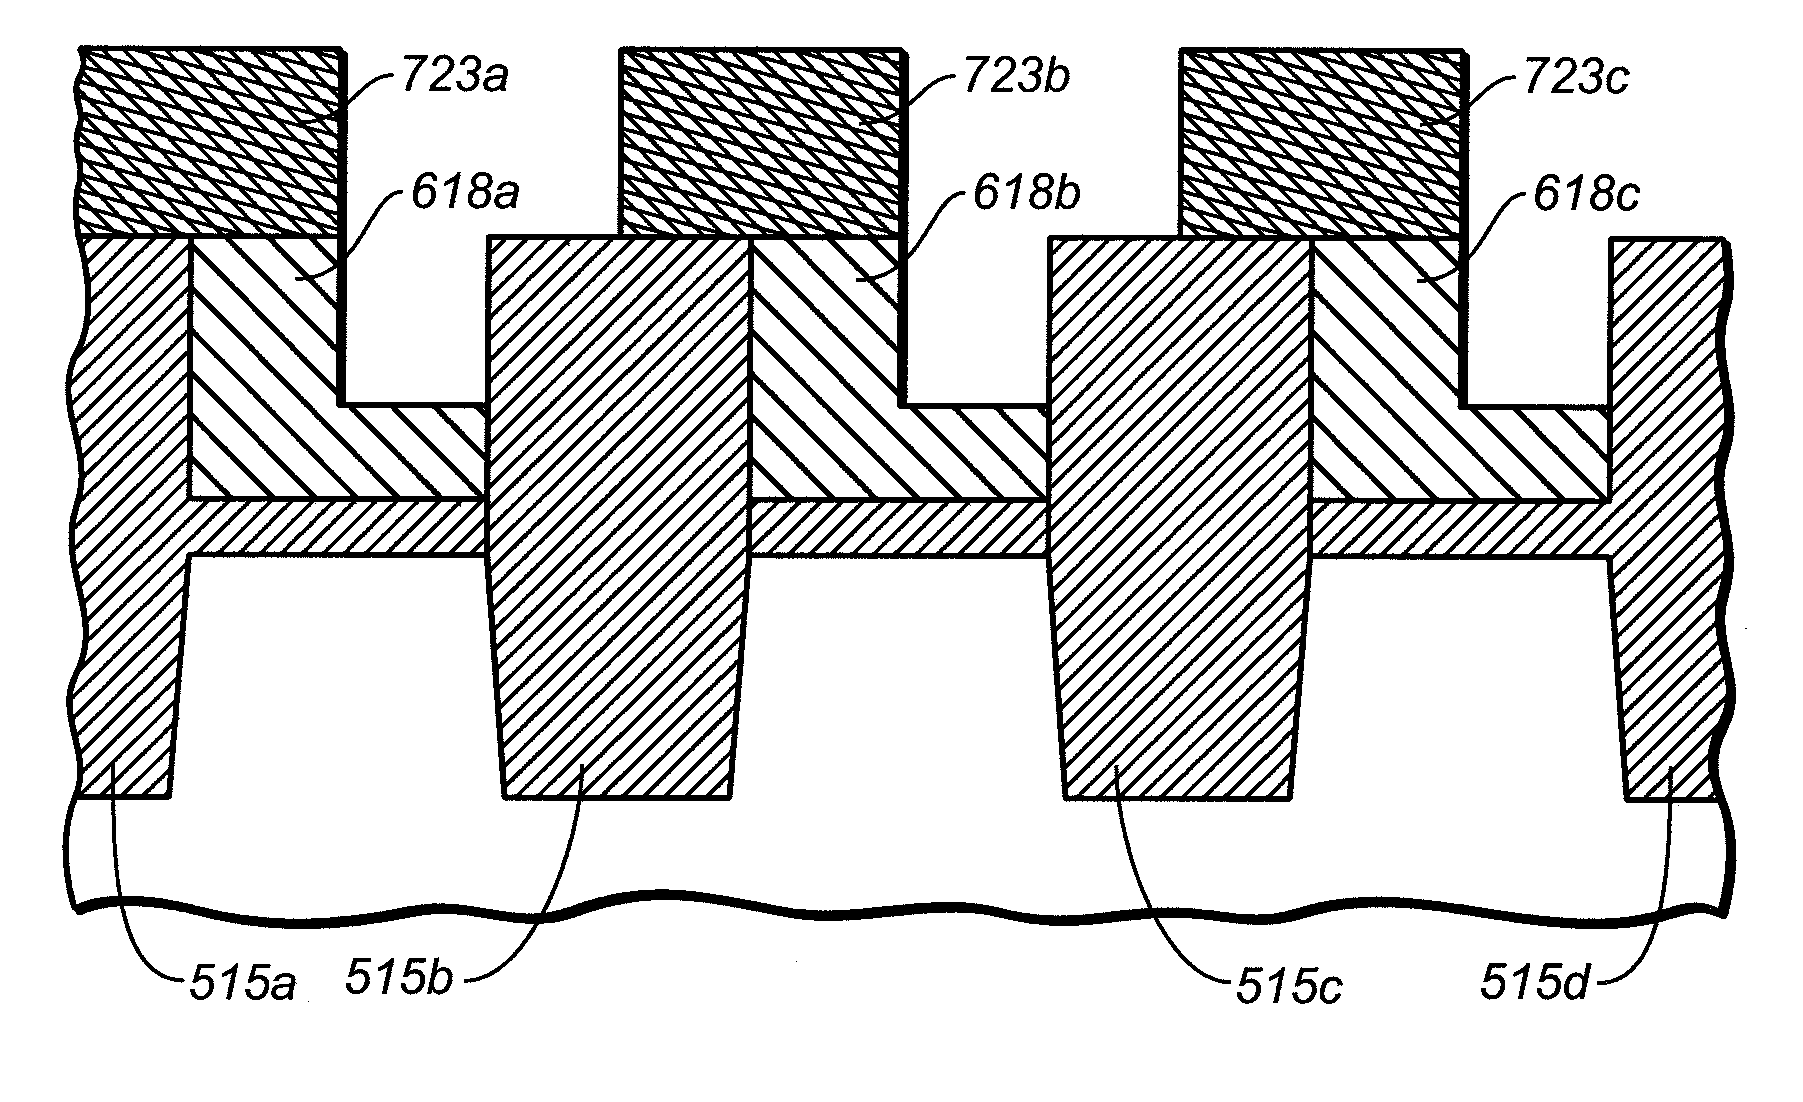 Methods of forming nonvolatile memories with L-shaped floating gates